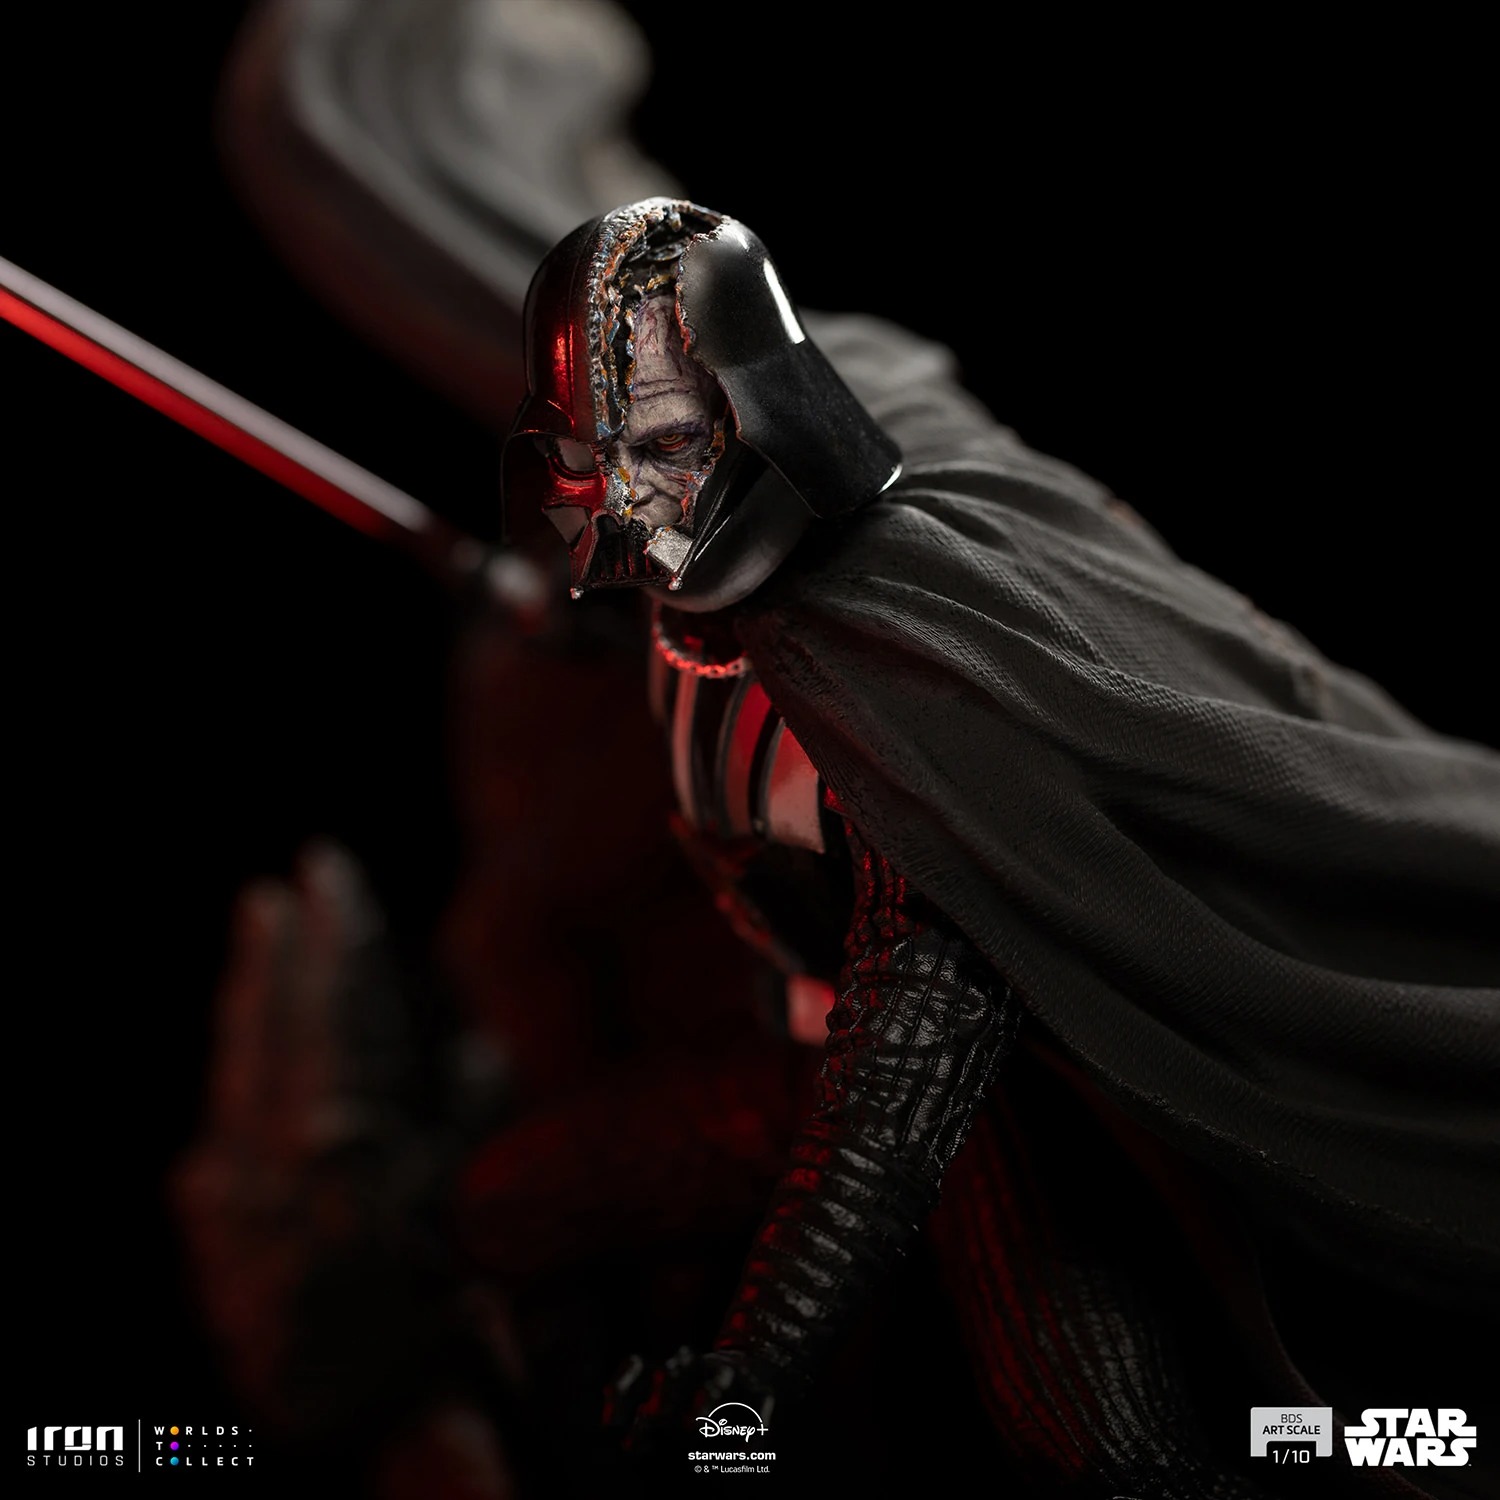 https://www.fanboycollectibles.com/images/Iron%20Studios%20-%20Darth%20Vader%20OBK%200013.jpg